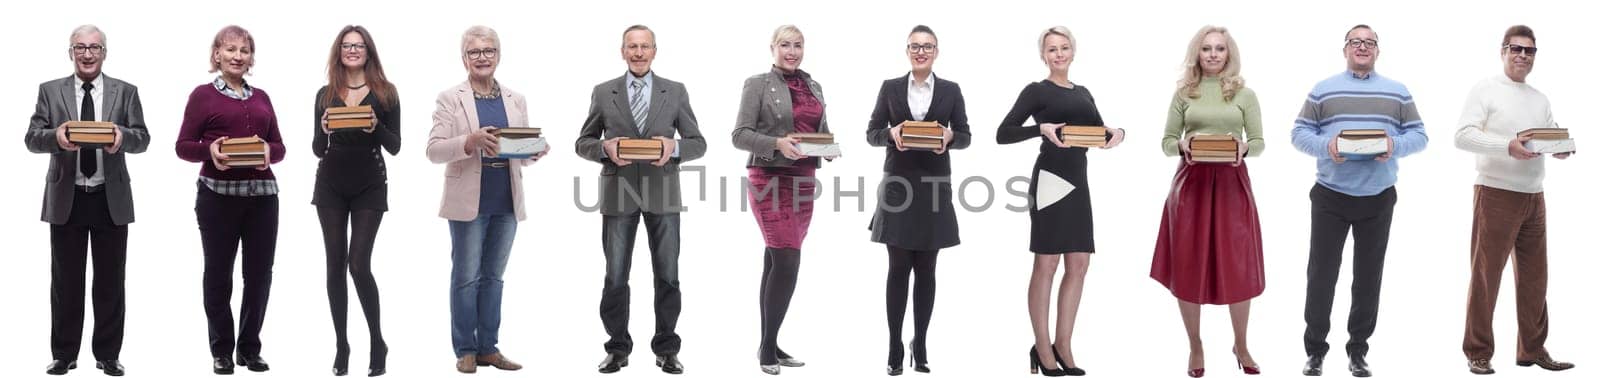 group of people holding books in hands isolated on white by asdf